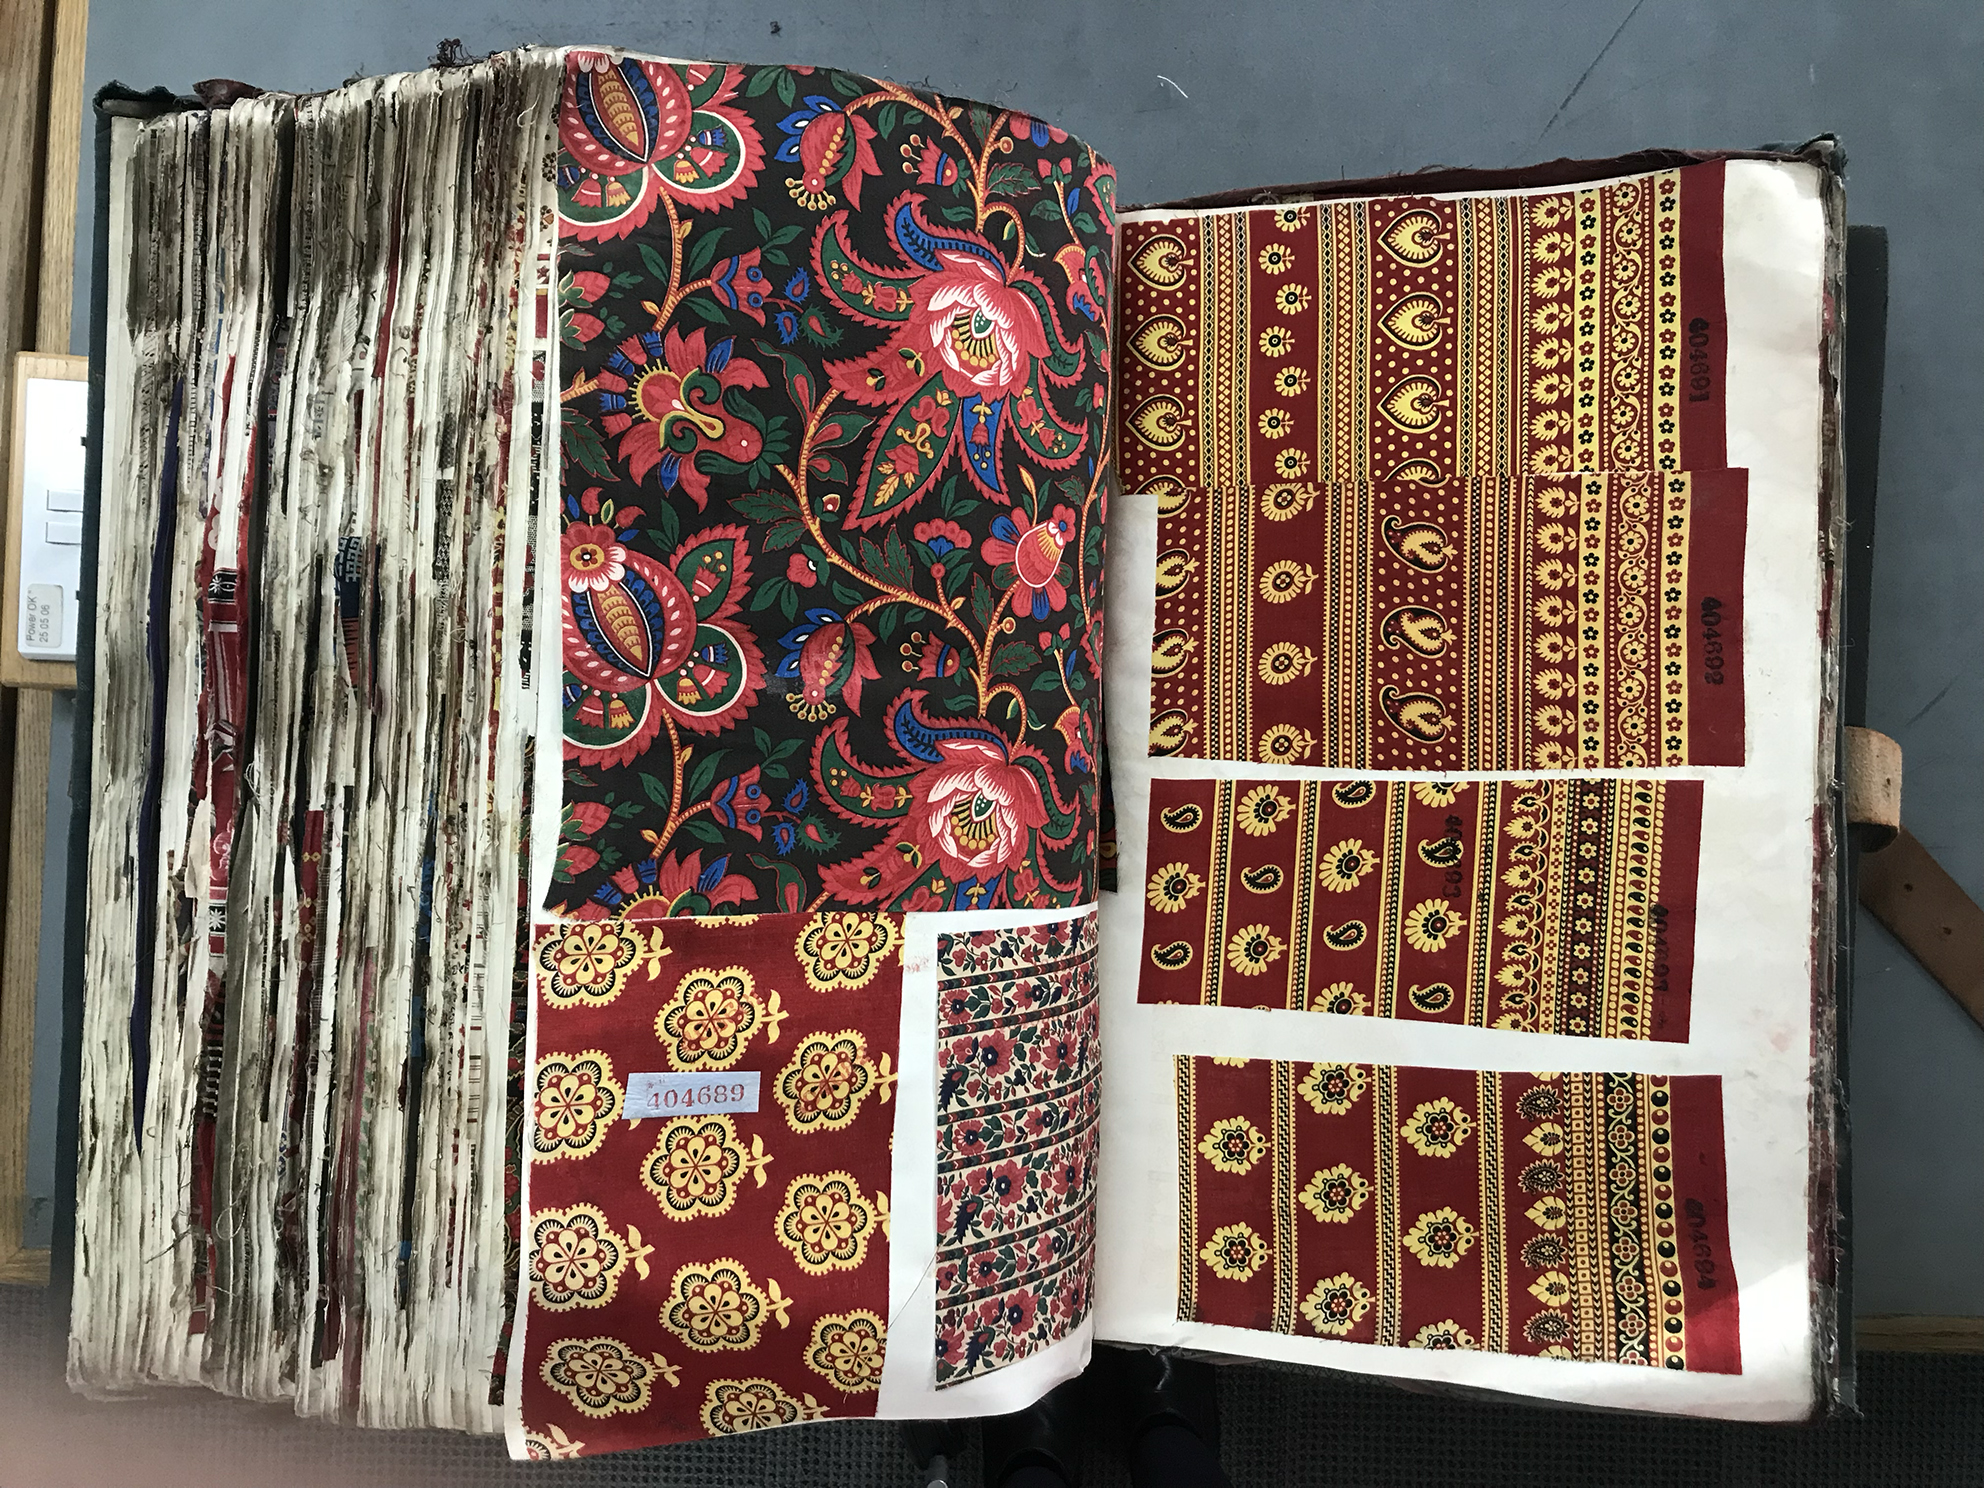 A large book with pages of colourful fabrics.